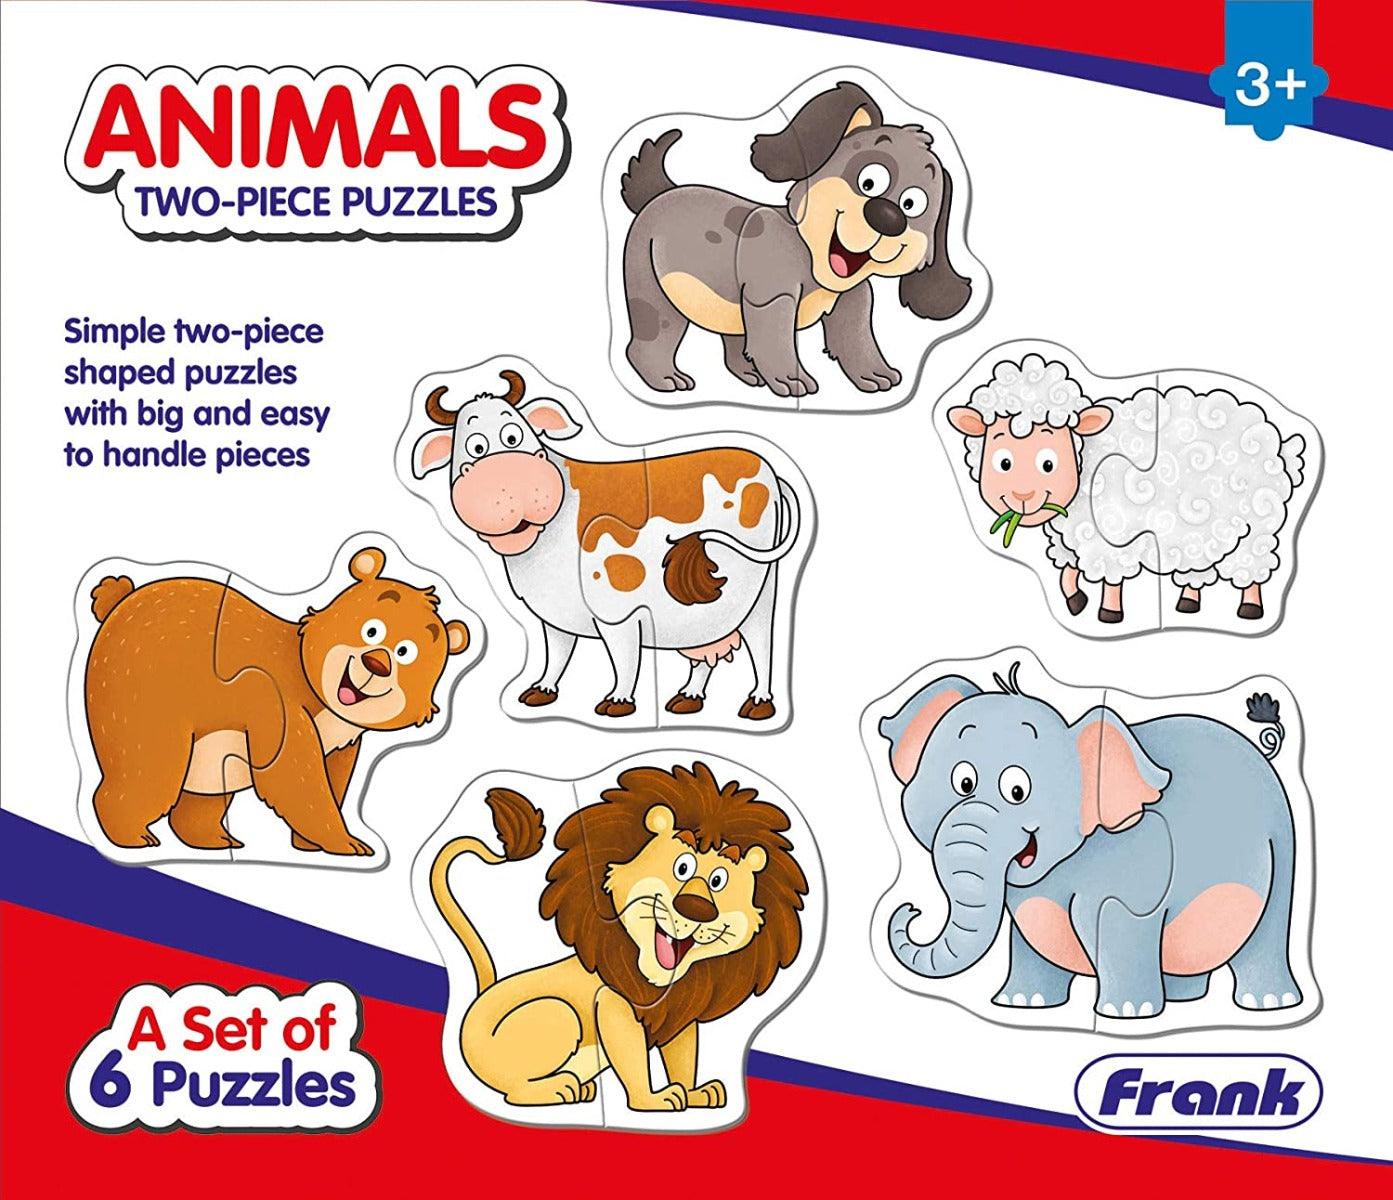 Frank Transport Puzzles - A Set of 6 Two-Piece Shaped Jigsaw Puzzles for 3 Year Old Kids and Above